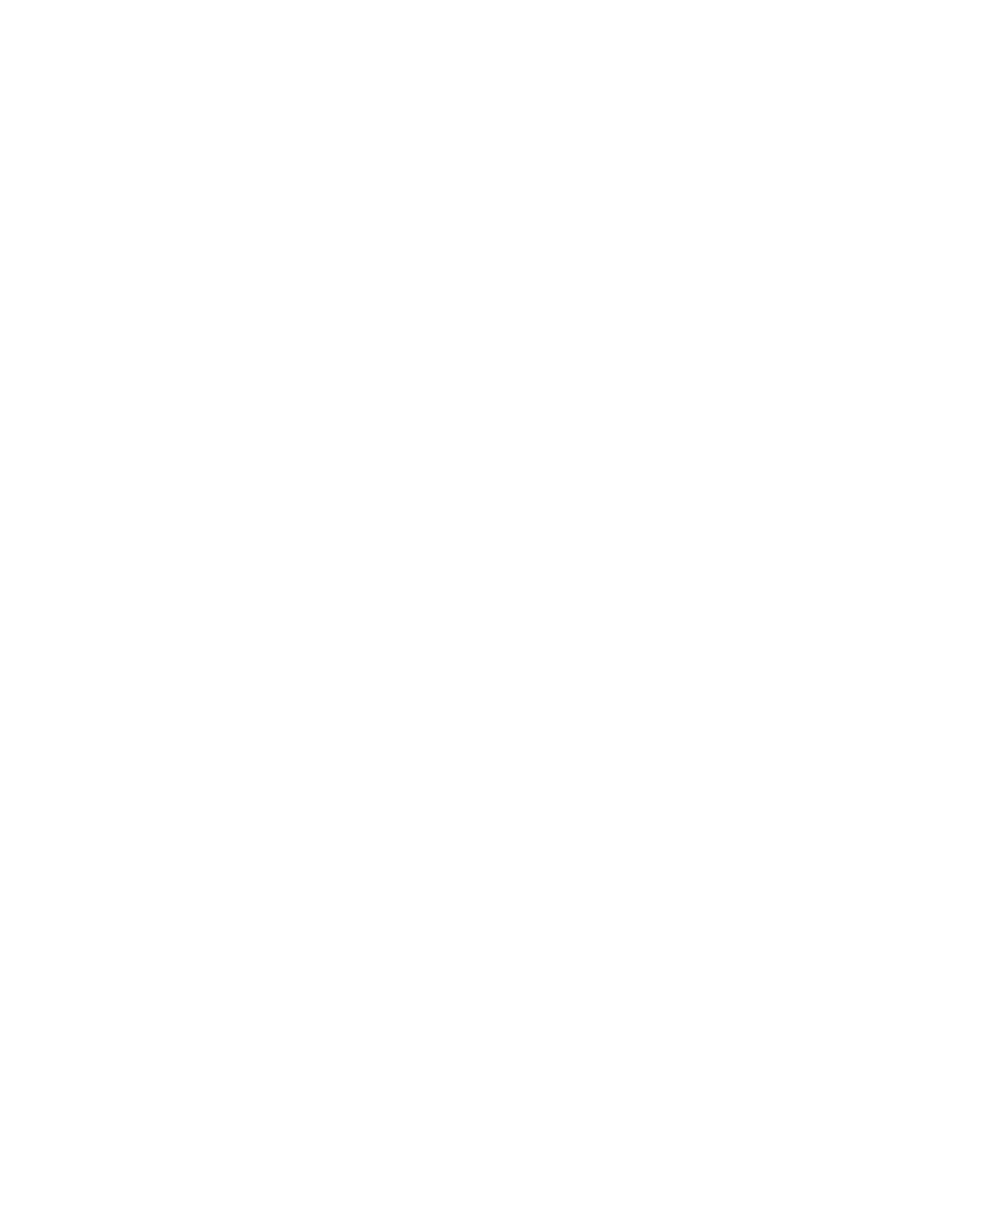 Nomadic by Nature